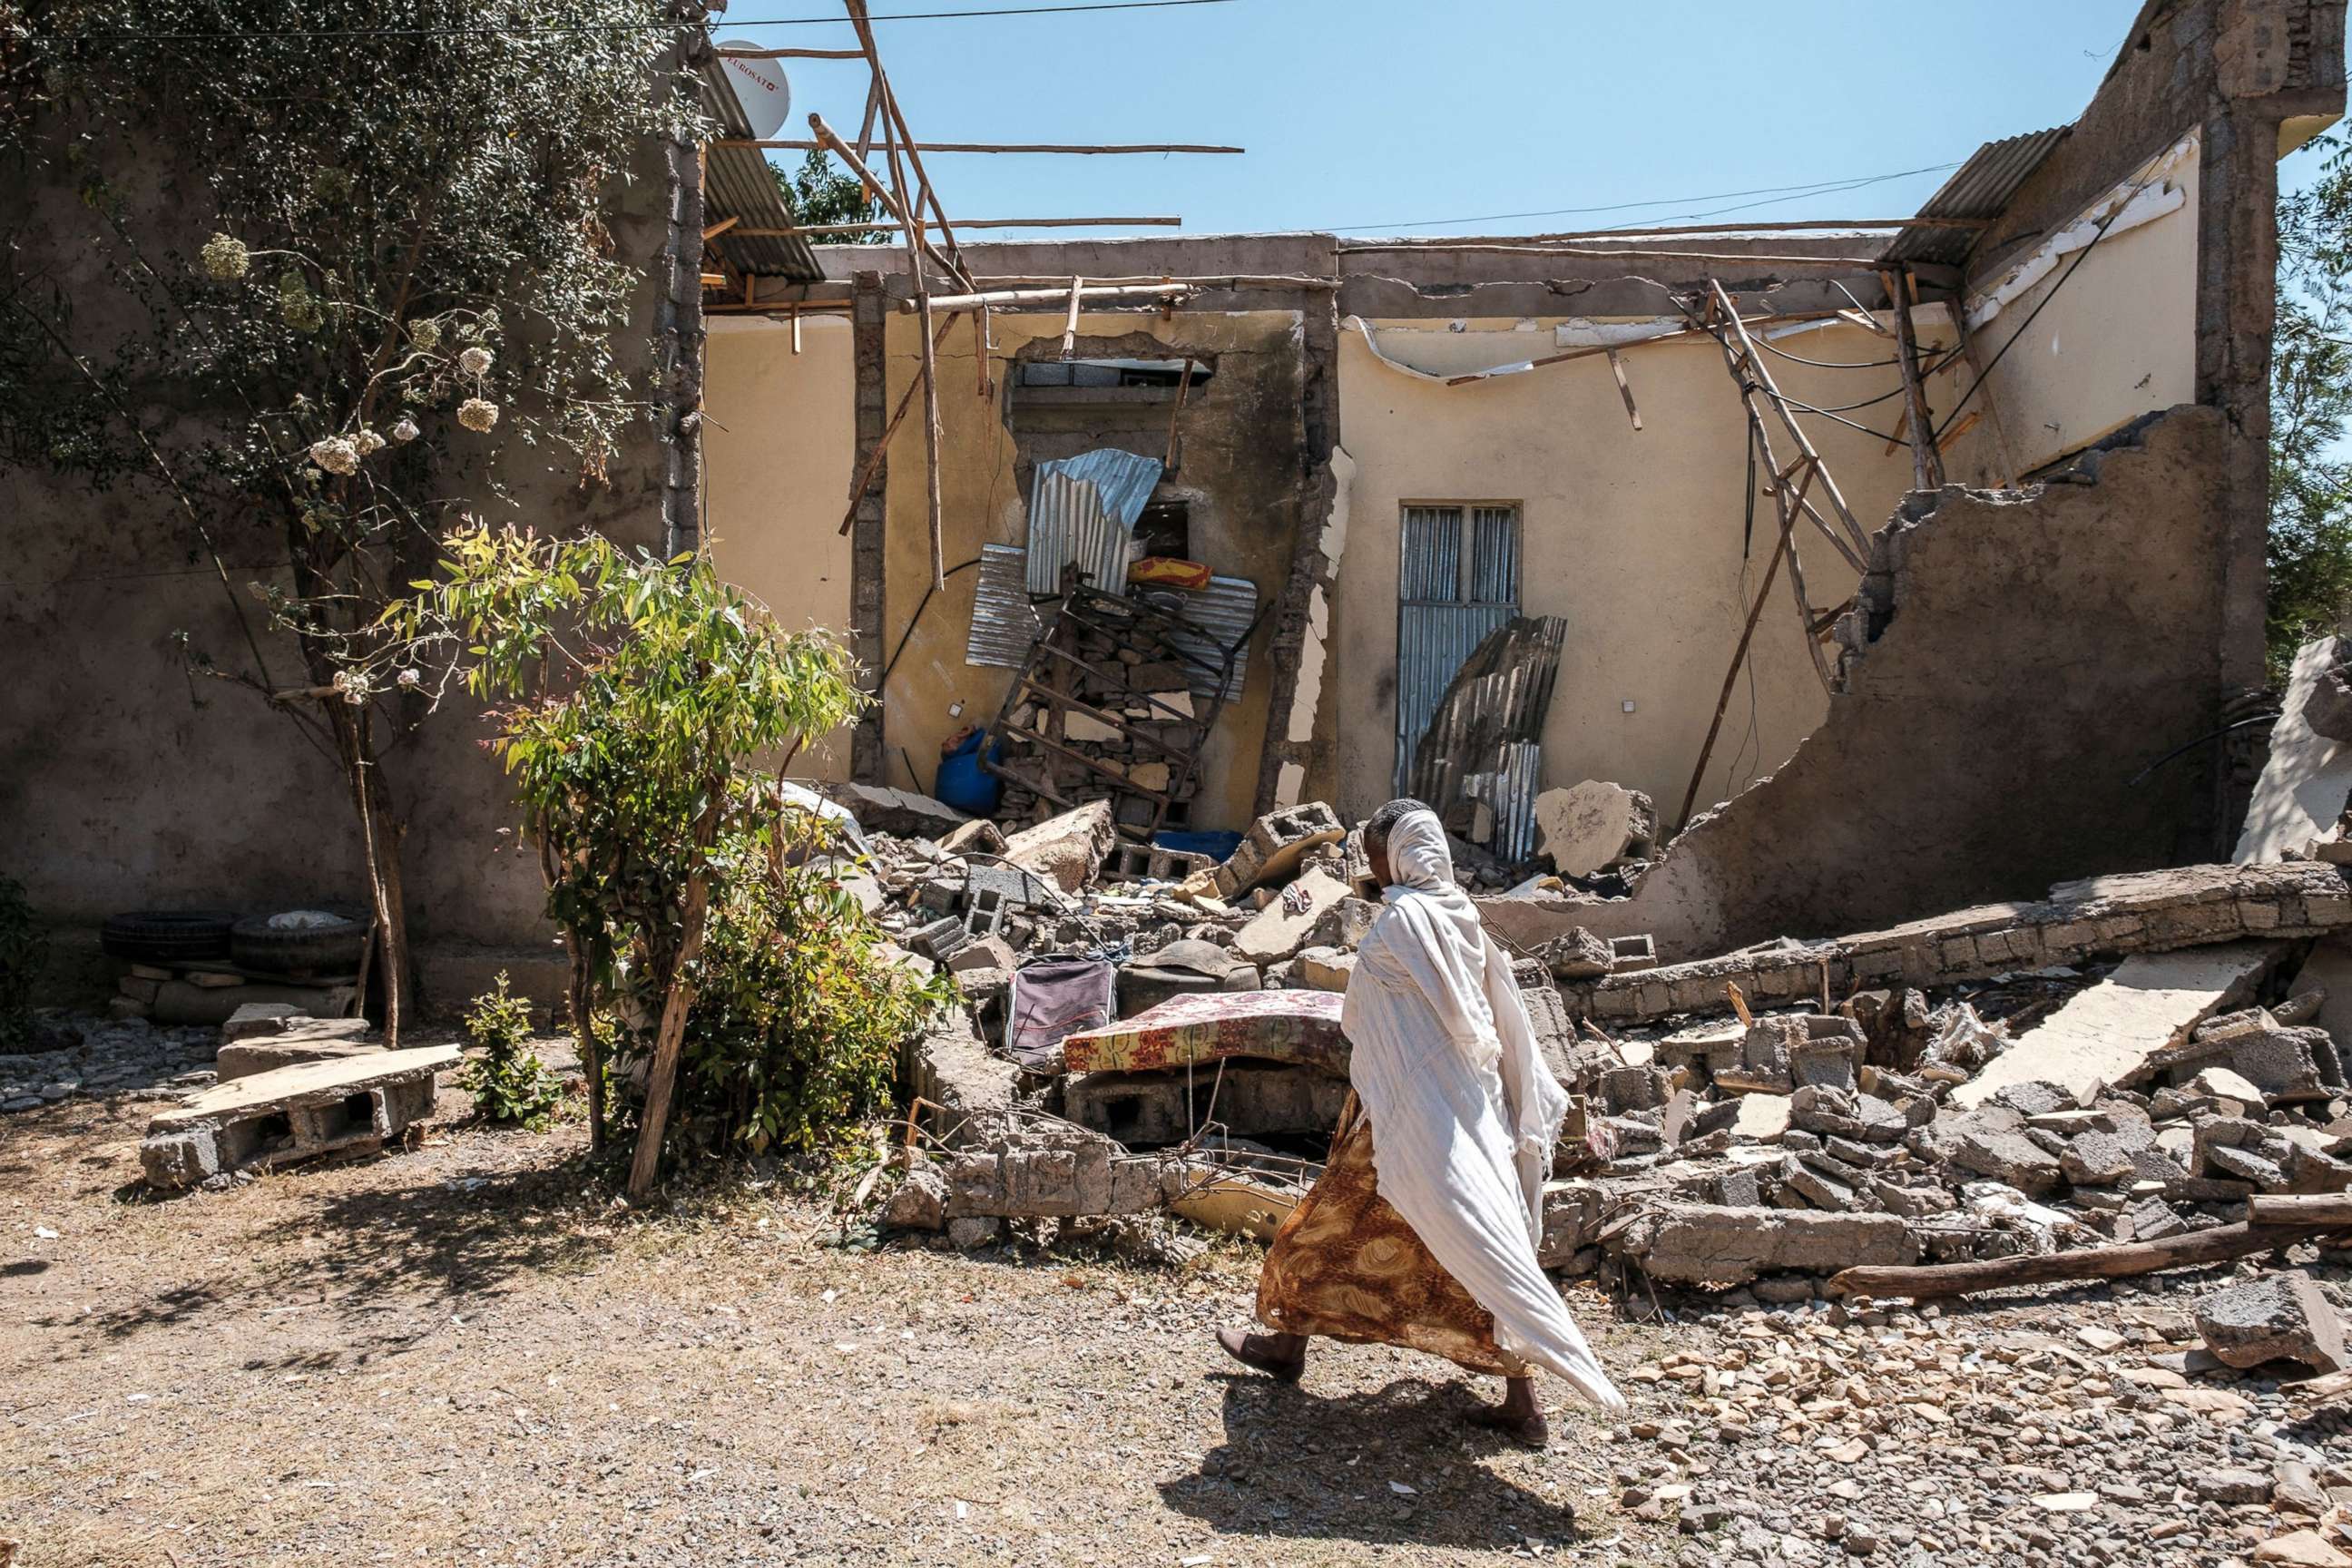 PHOTO: A woman walks in front of a damaged house which was shelled as federal-aligned forces entered the city, in Wukro, north of Mekele, March 1, 2021.